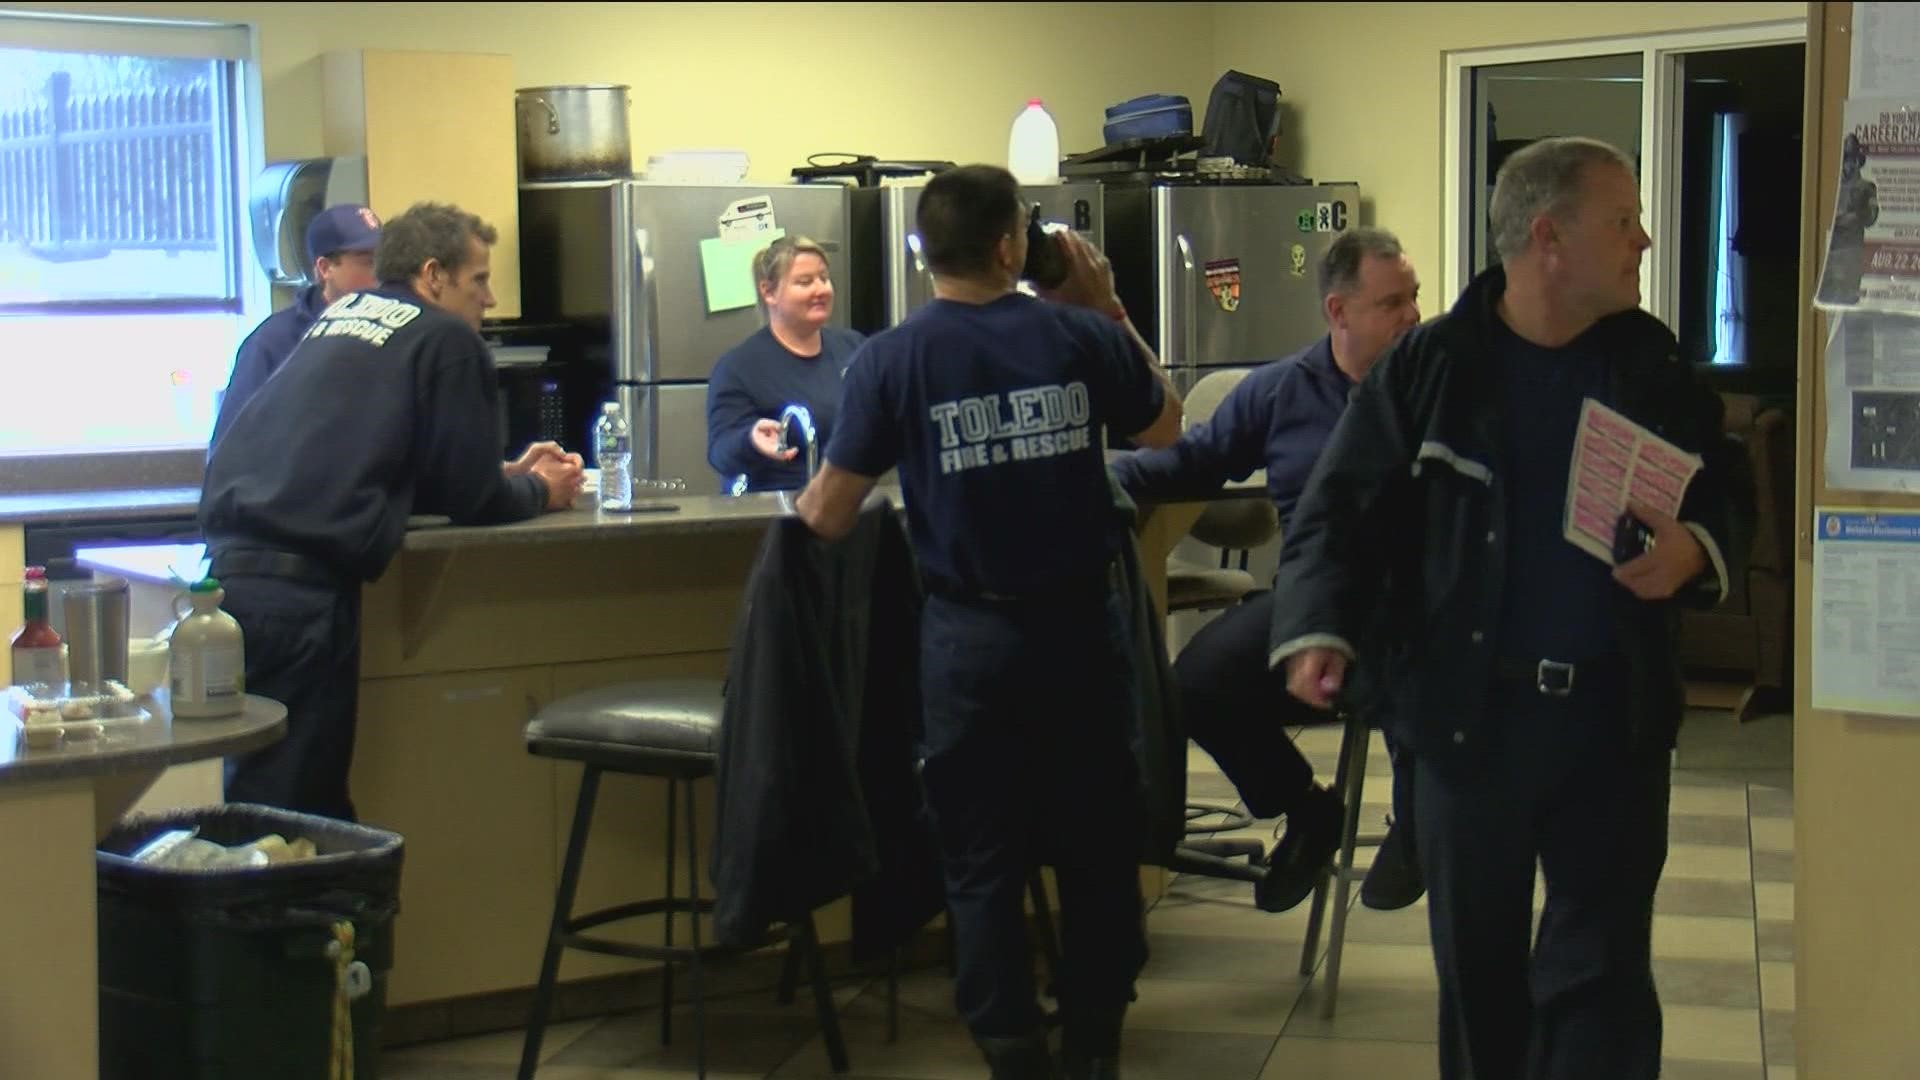 Firefighters, police officers and medical professionals don't usually have the holidays off. But departments are close enough to still celebrate while on duty.